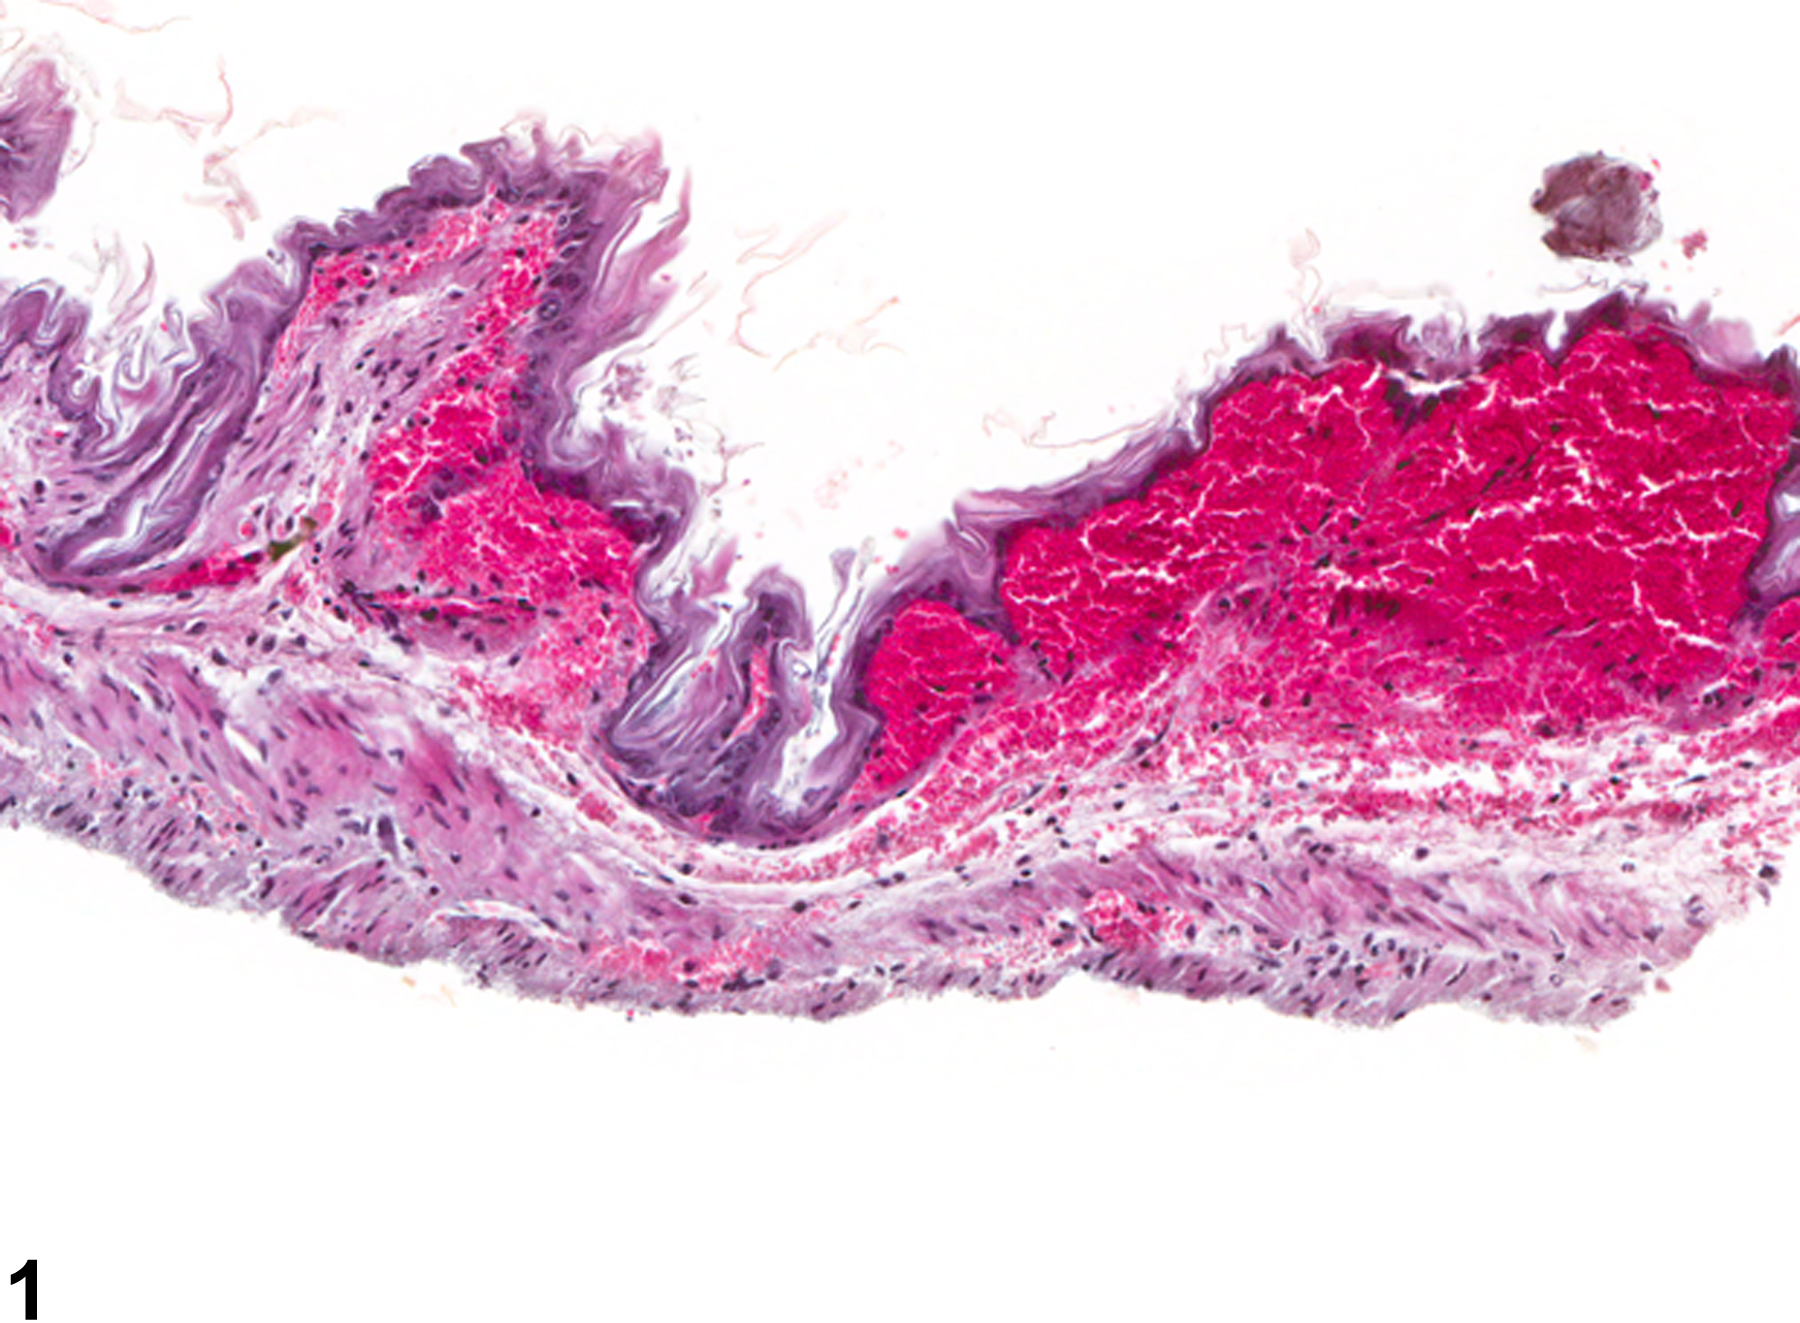 Image of hemorrhage in the forestomach from a female B6C3F1 mouse in a chronic study